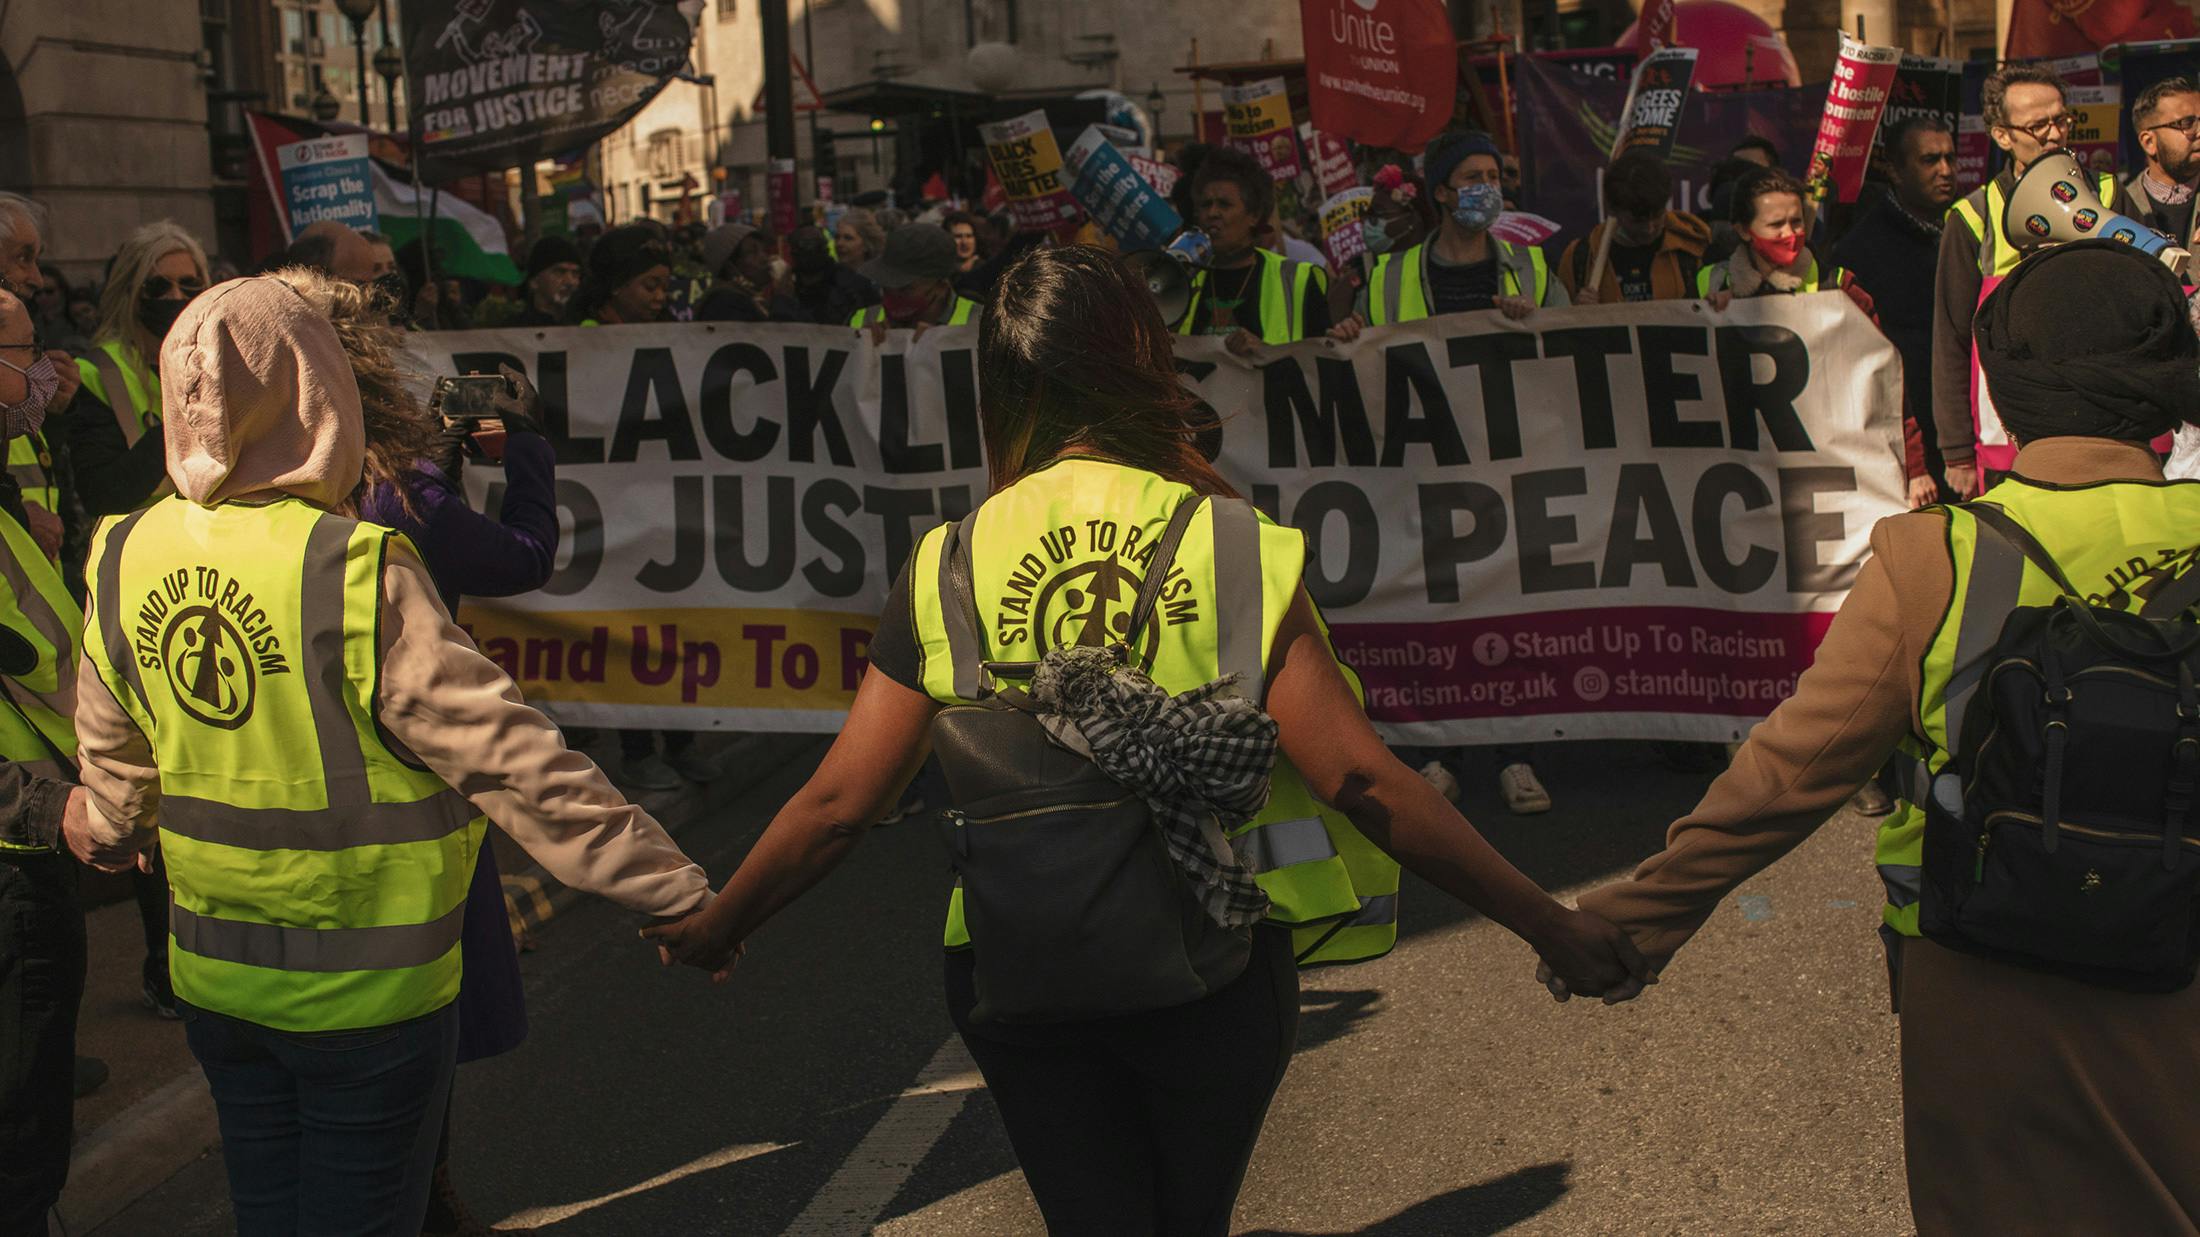 “We need to build a revolutionary anti-racist movement on the streets”: Inside the March Against Racism